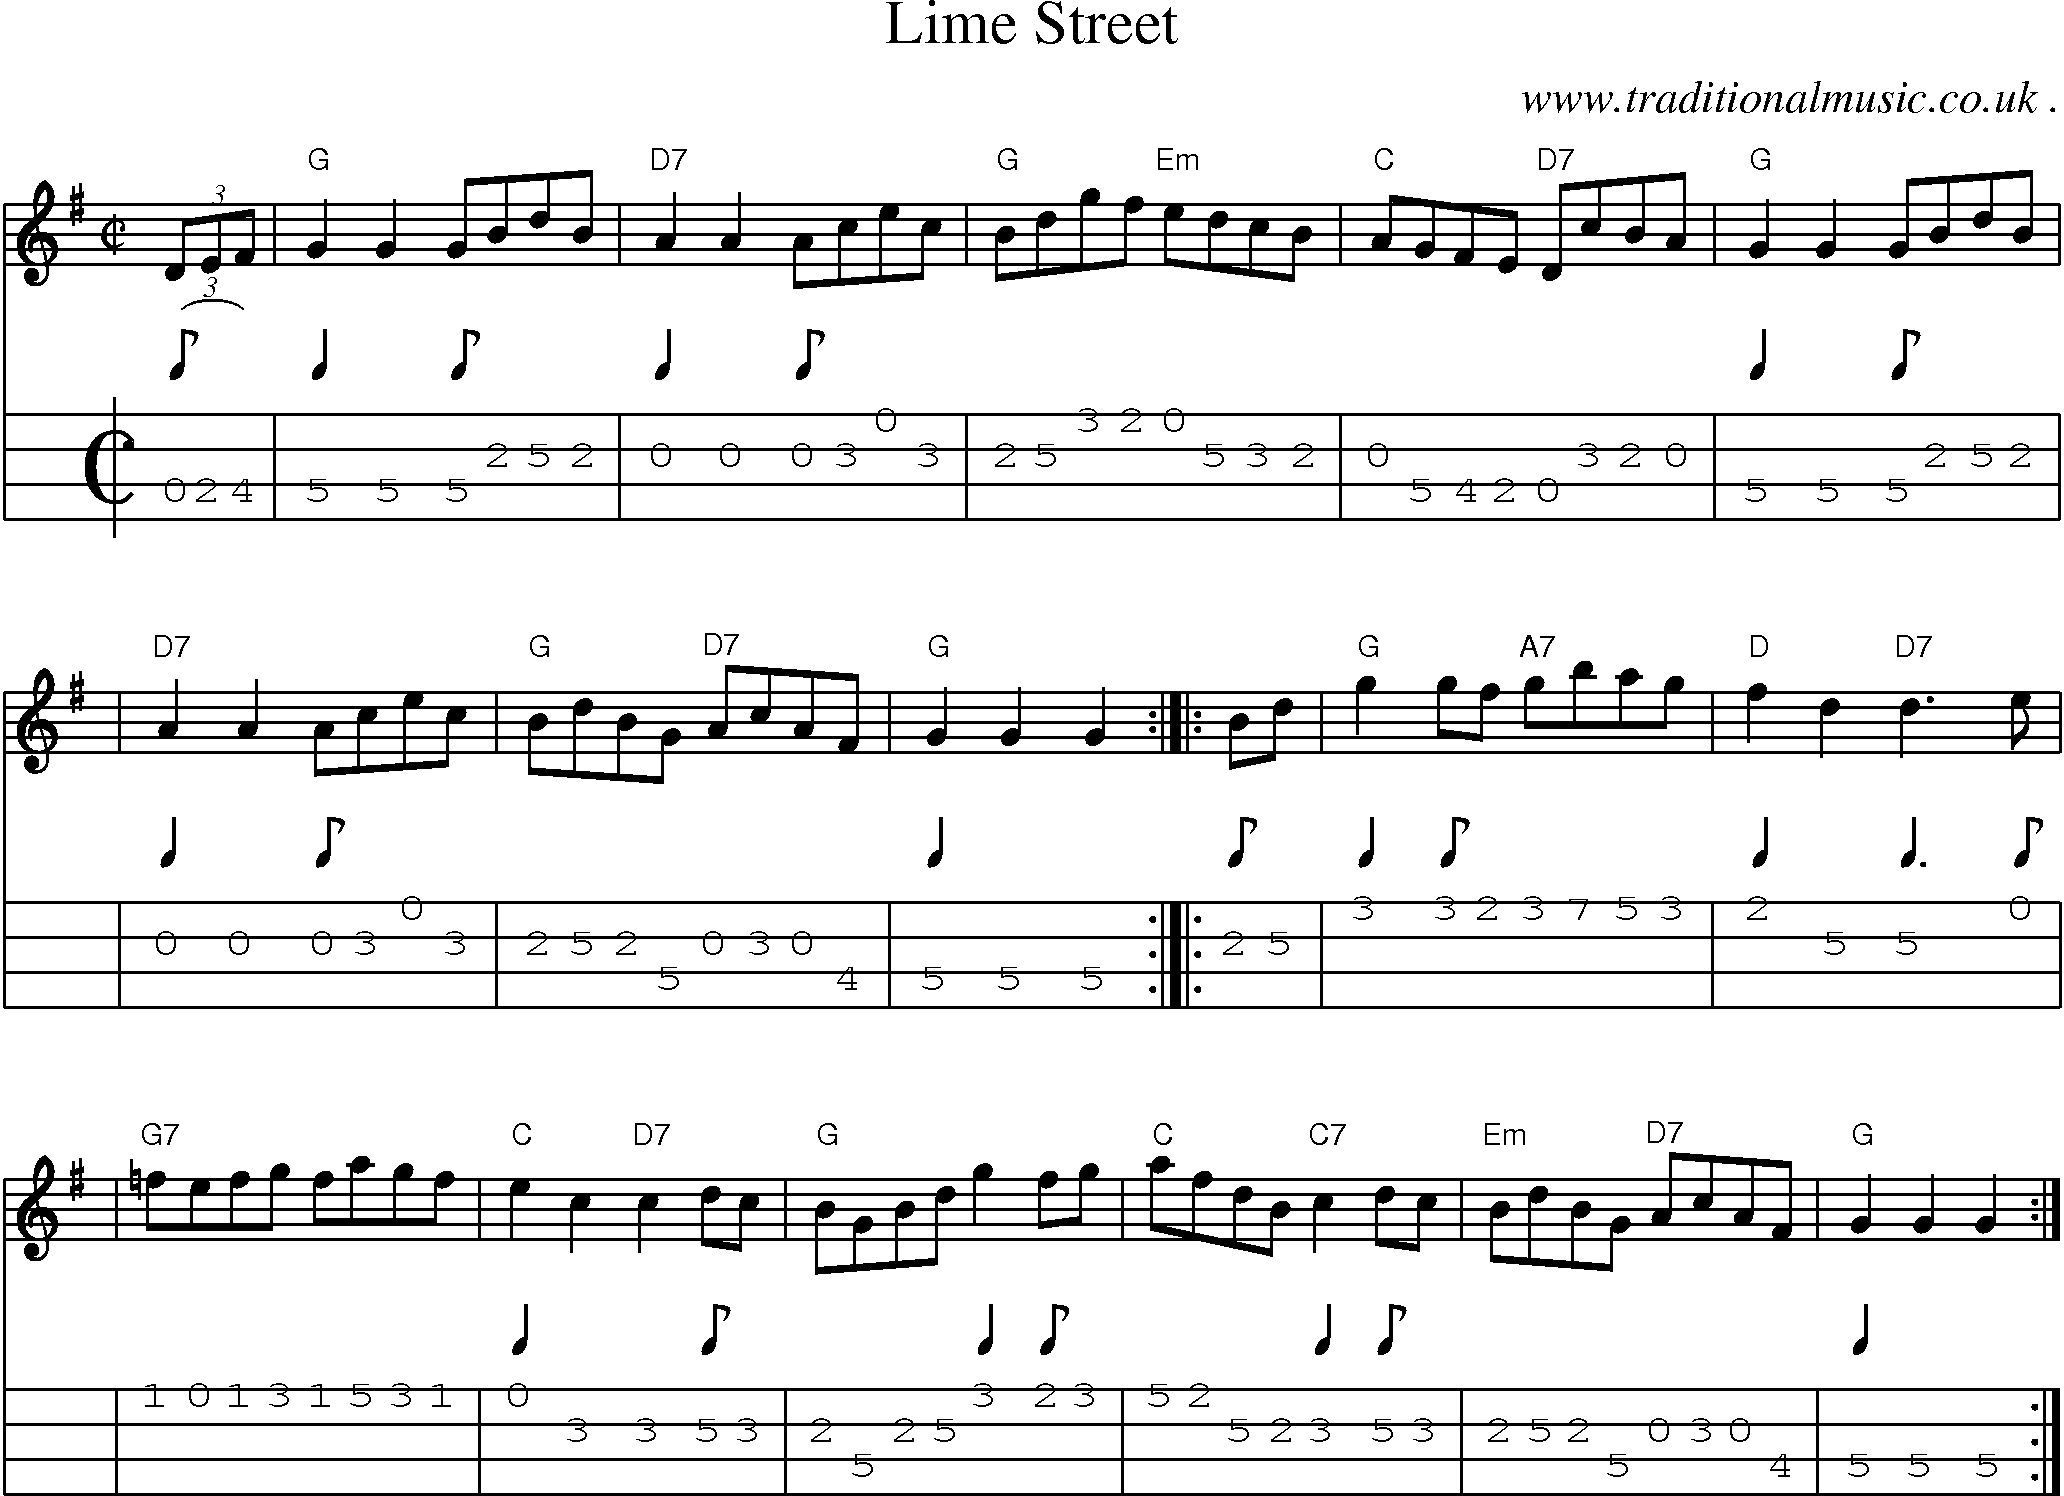 Sheet-music  score, Chords and Mandolin Tabs for Lime Street